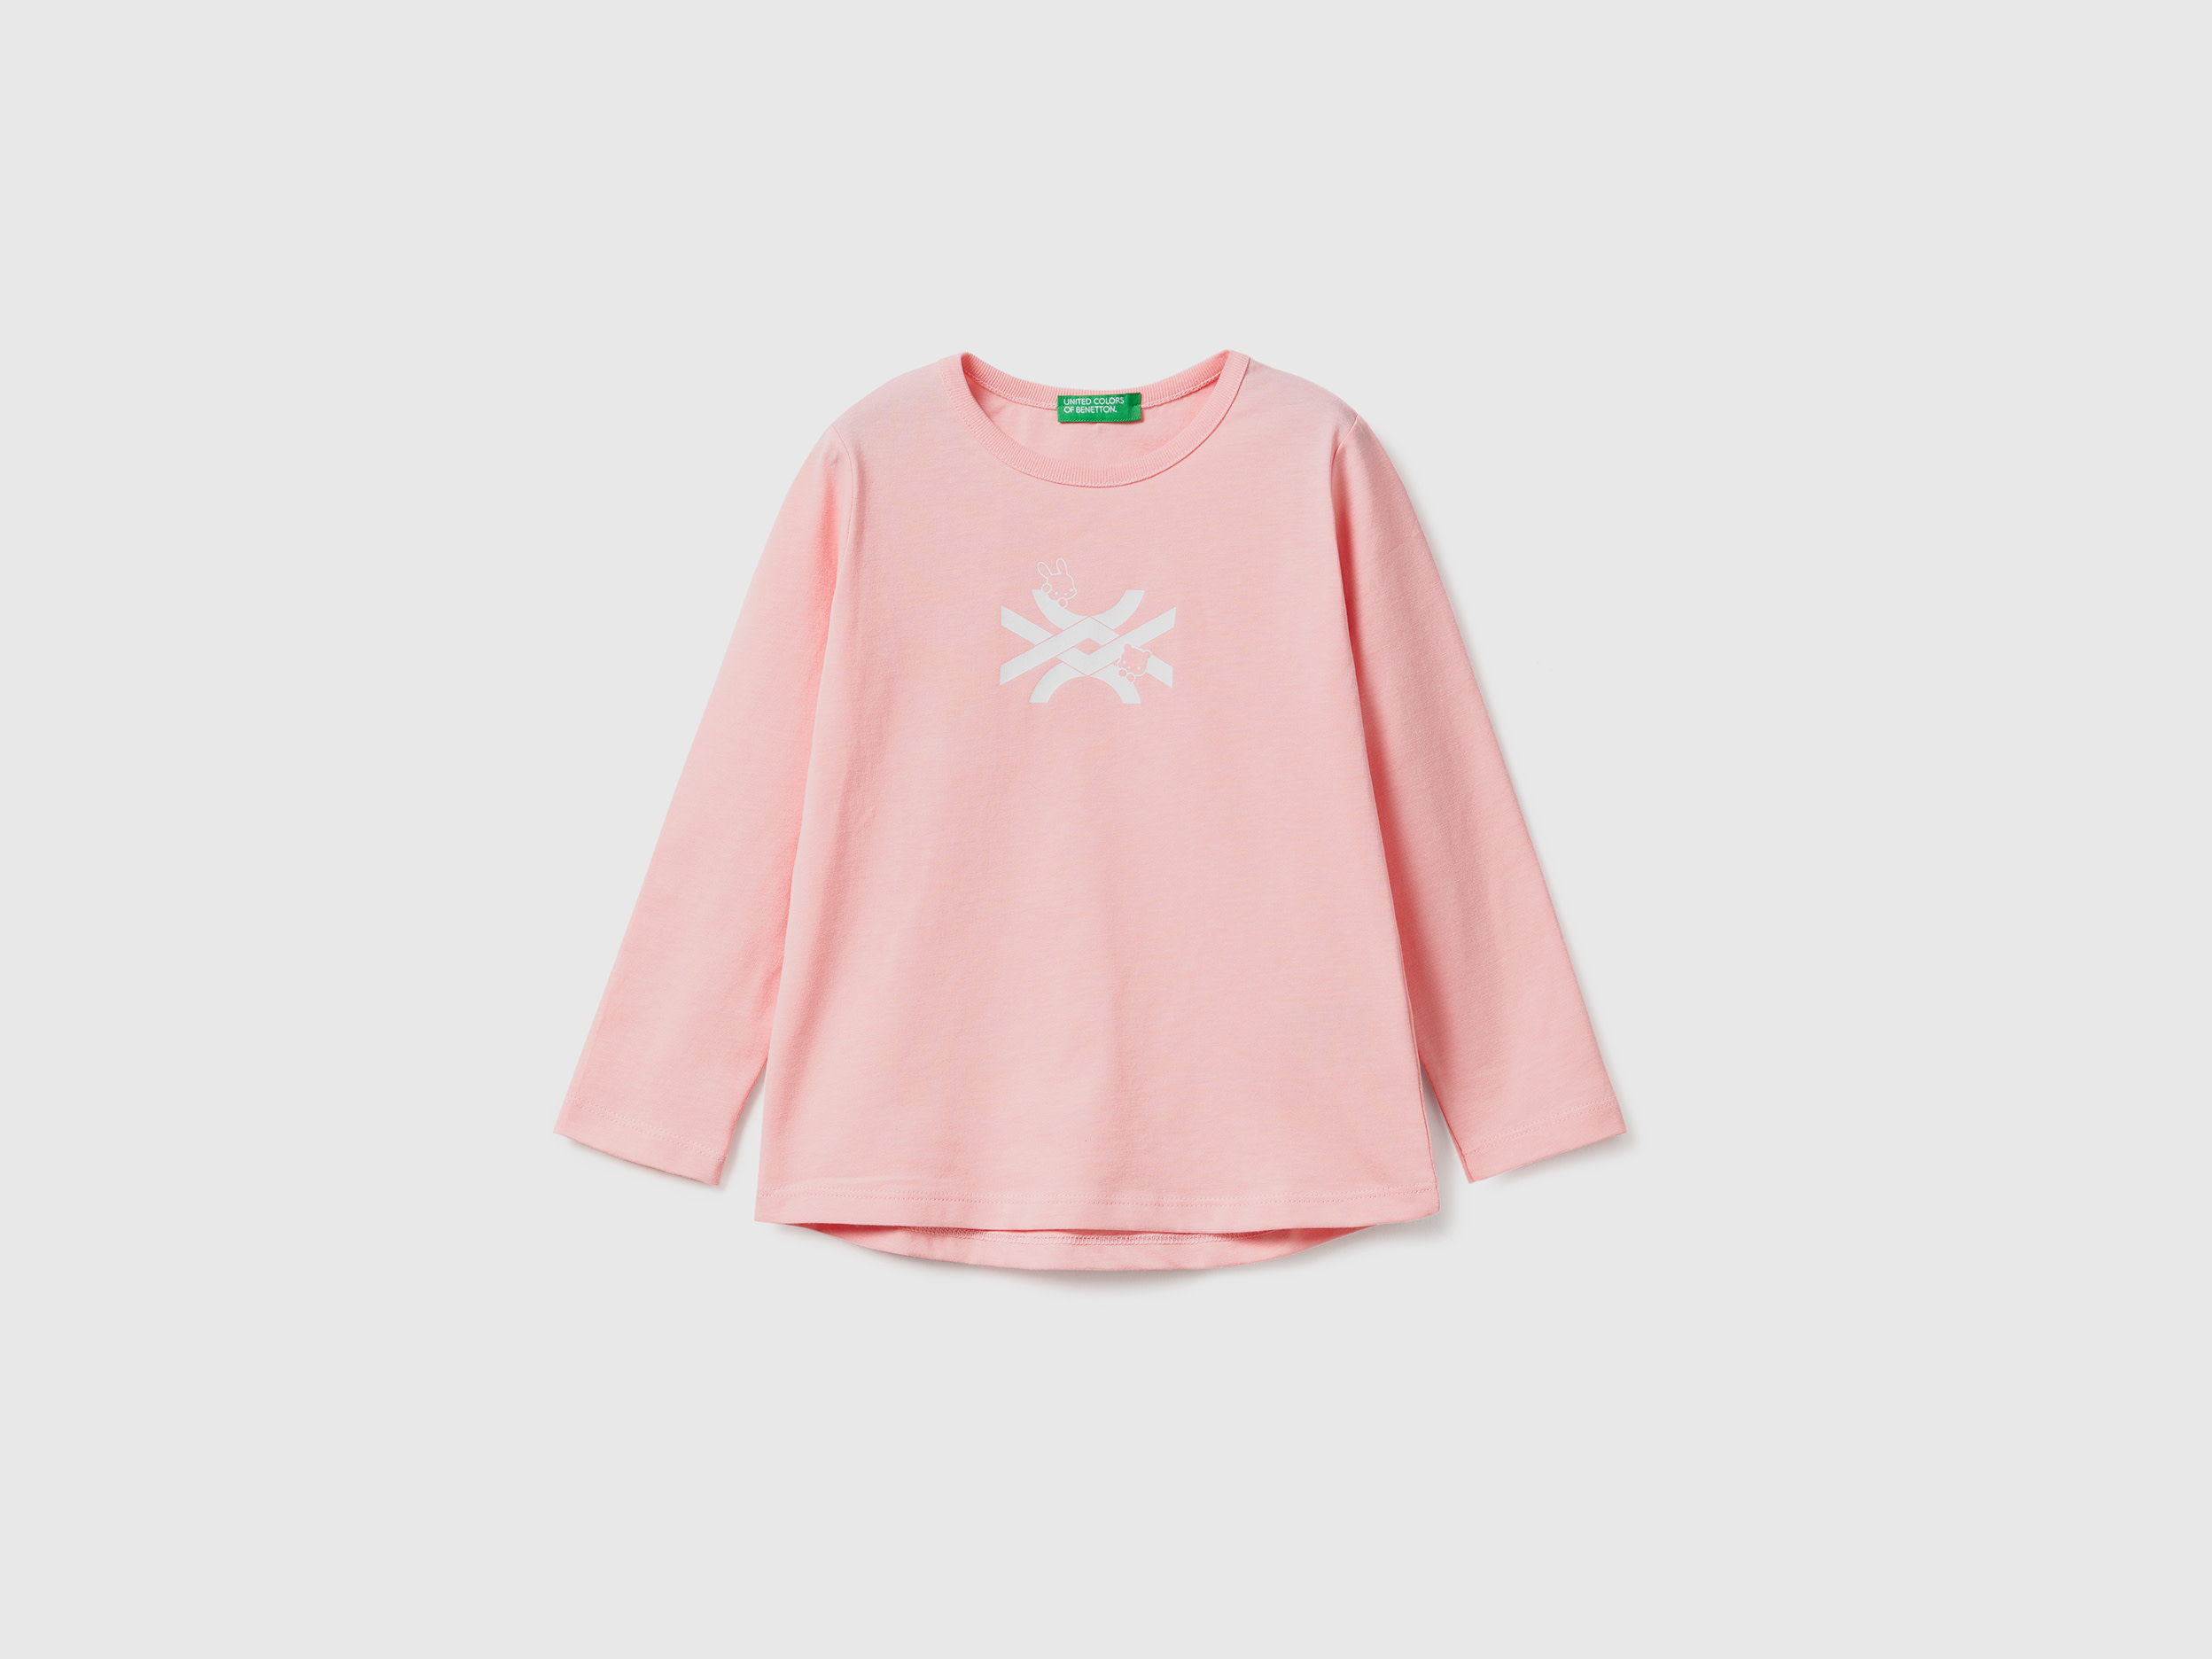 Benetton, 100% Cotton T-shirt With Logo, size 5-6, Pink, Kids